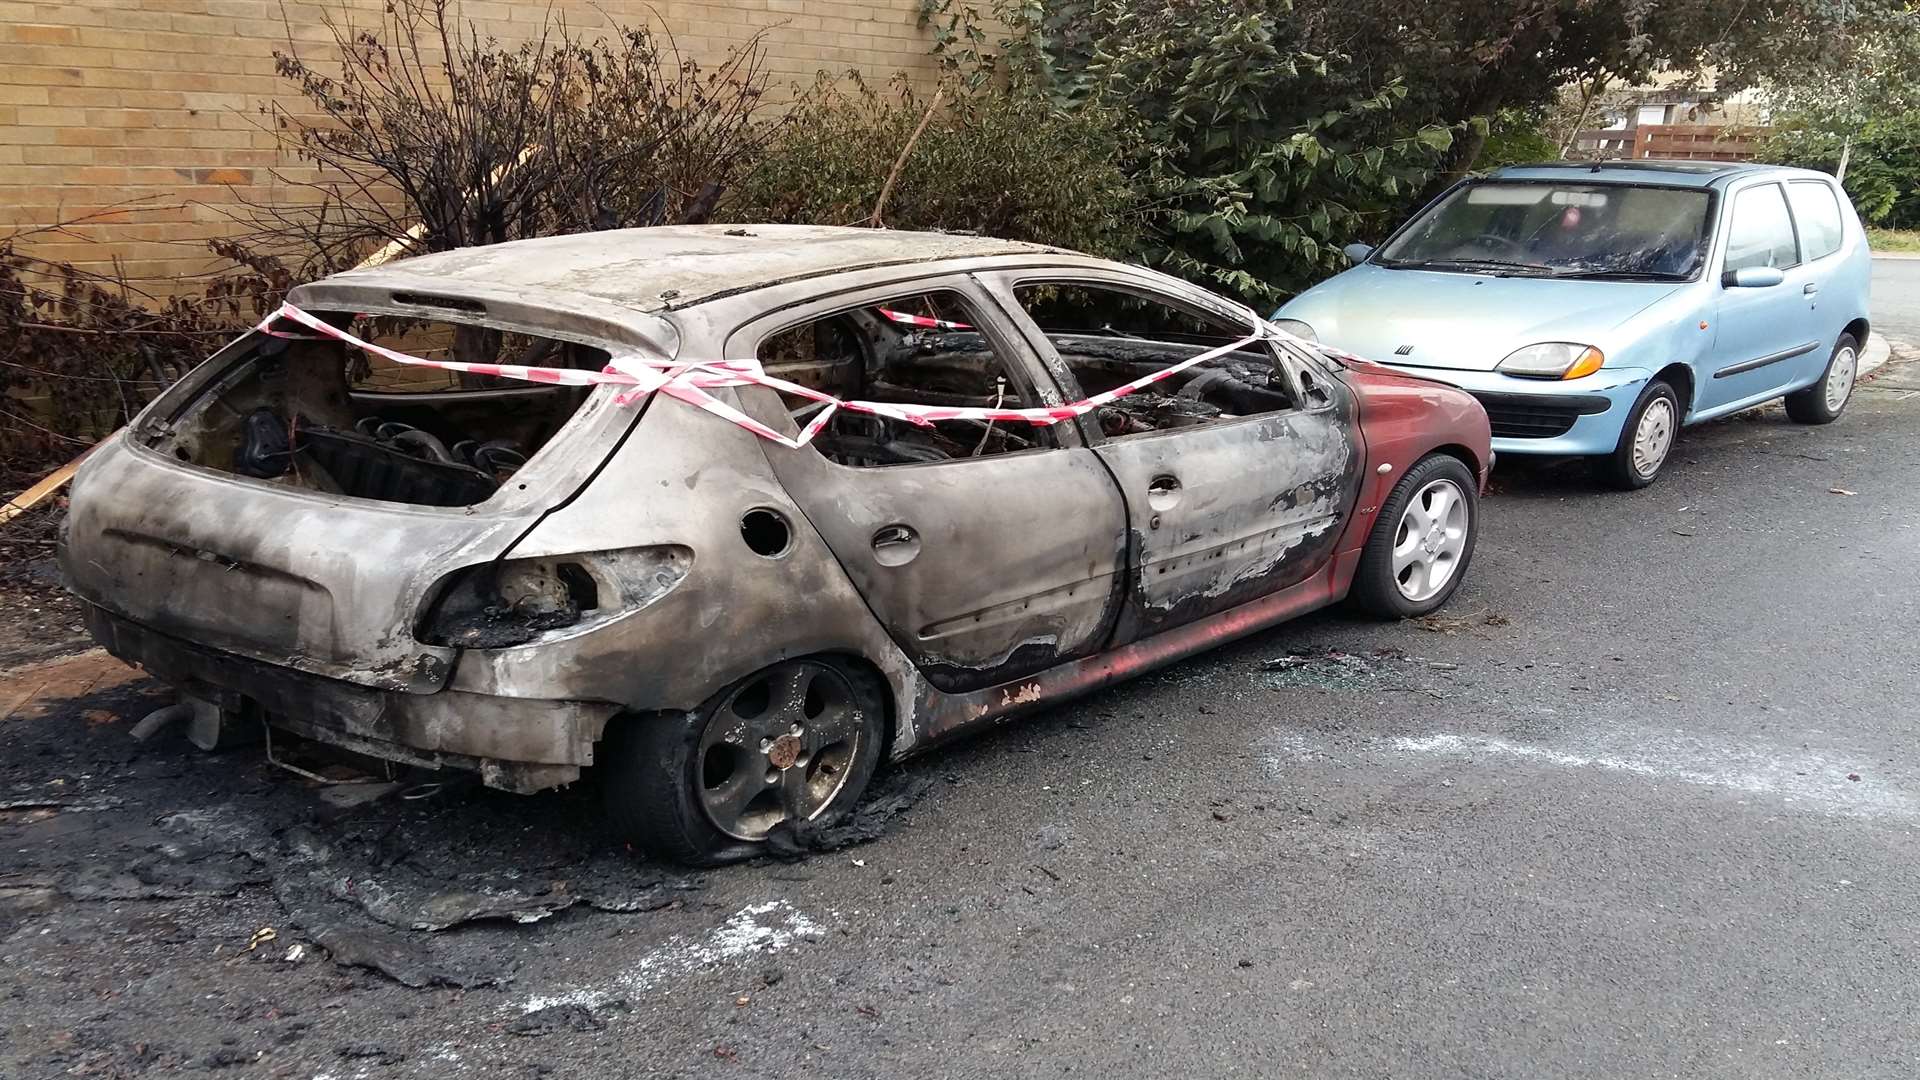 A car was set alight by arsonists in the Stanhope area of Ashford